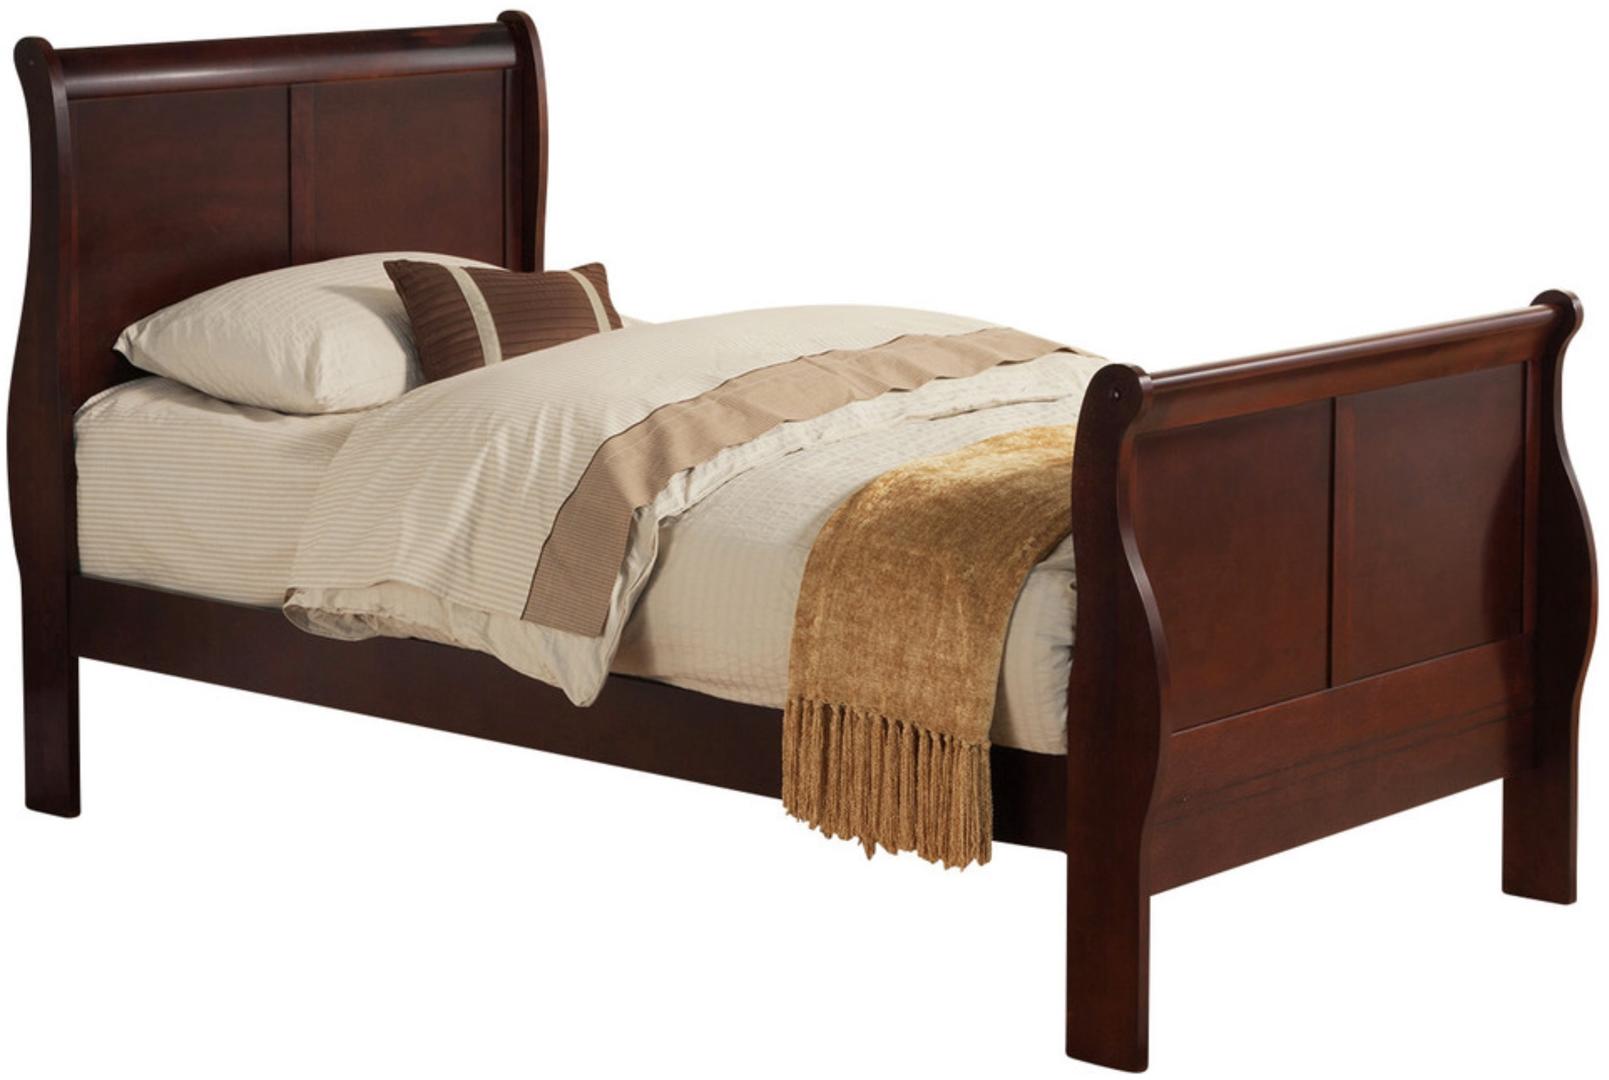 Acme Louis Philippe lll Full Panel Bed in Cherry 19528F by Dining Rooms  Outlet by Dining Rooms Outlet